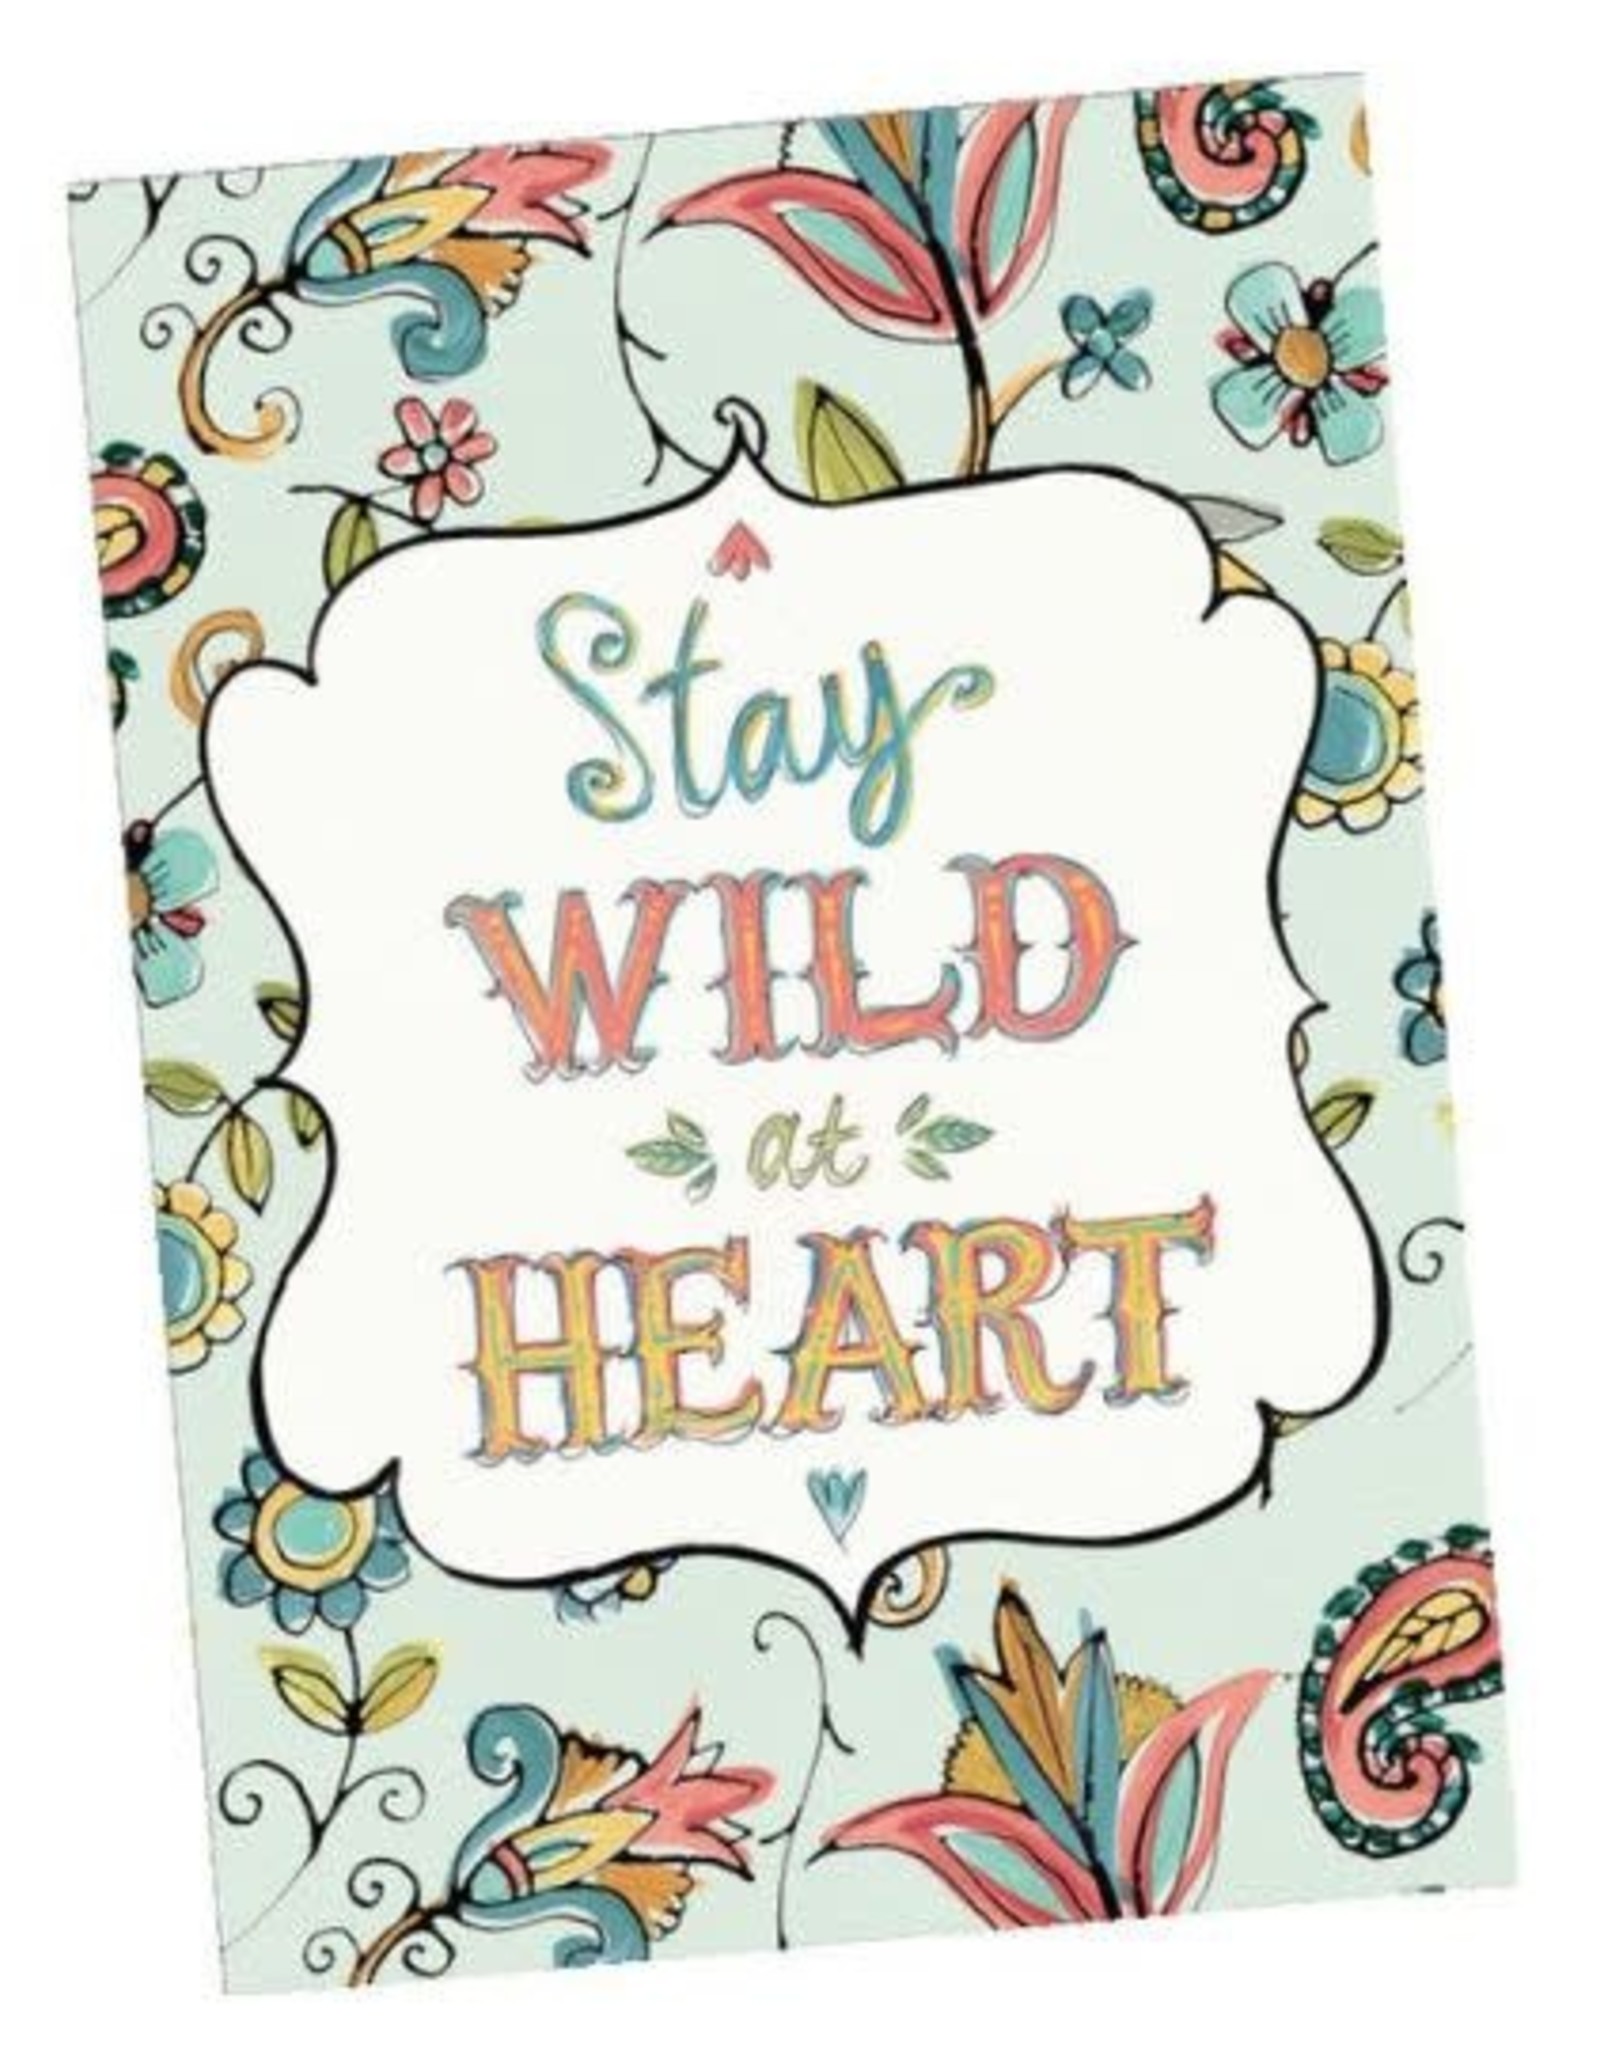 Stay Wild at Heart Greeting Card